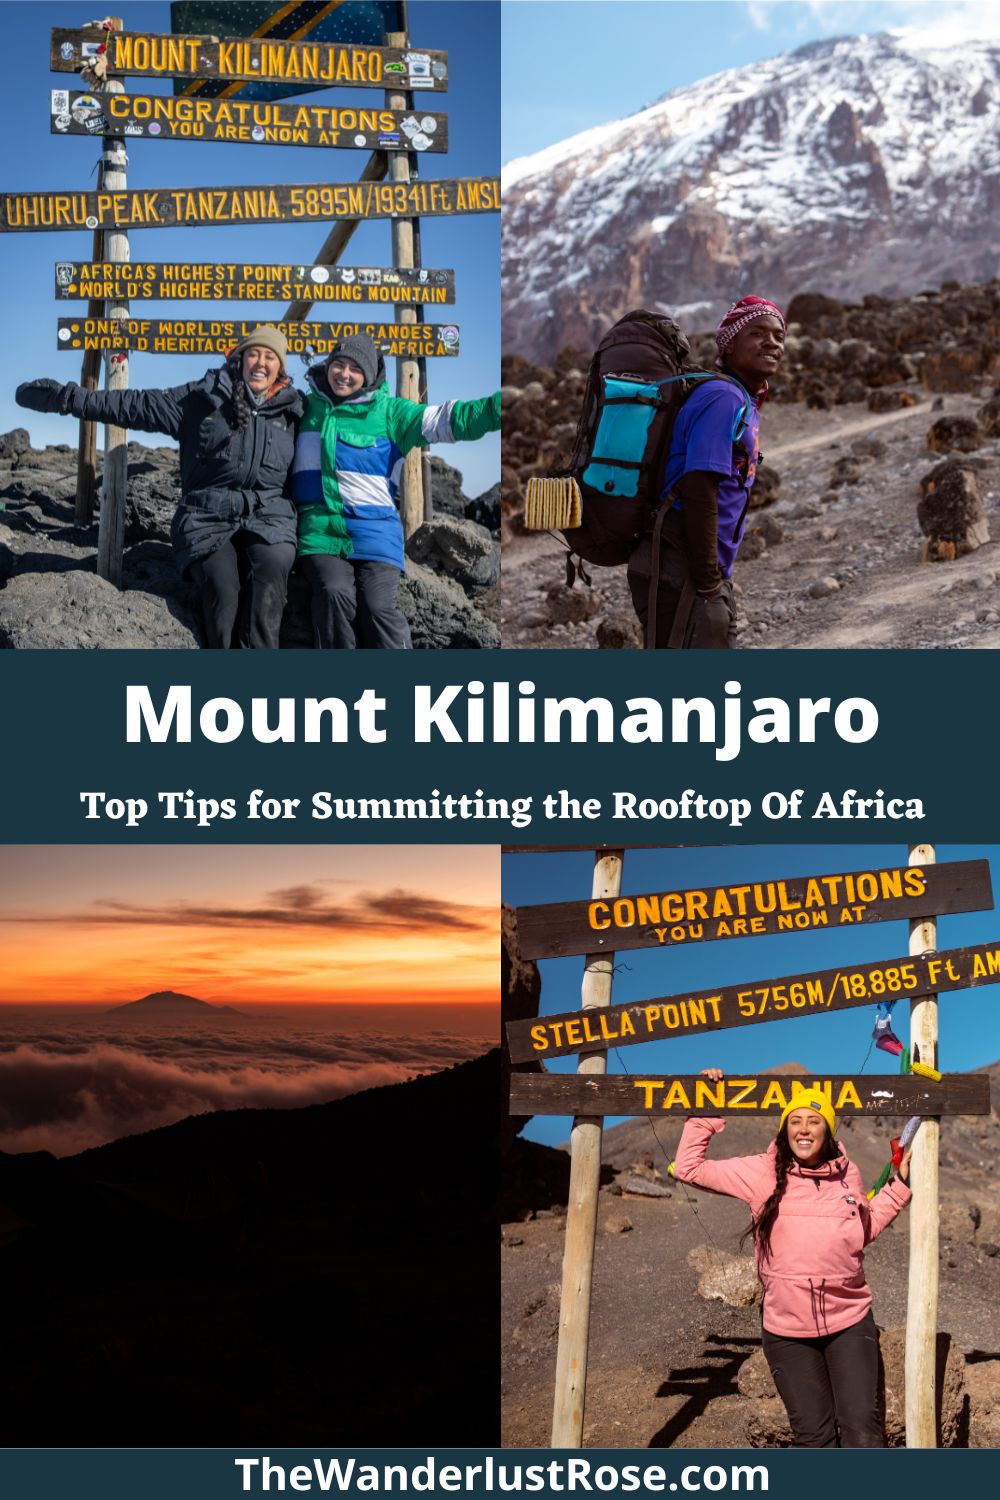 What are the Best Socks for Climbing Kilimanjaro?